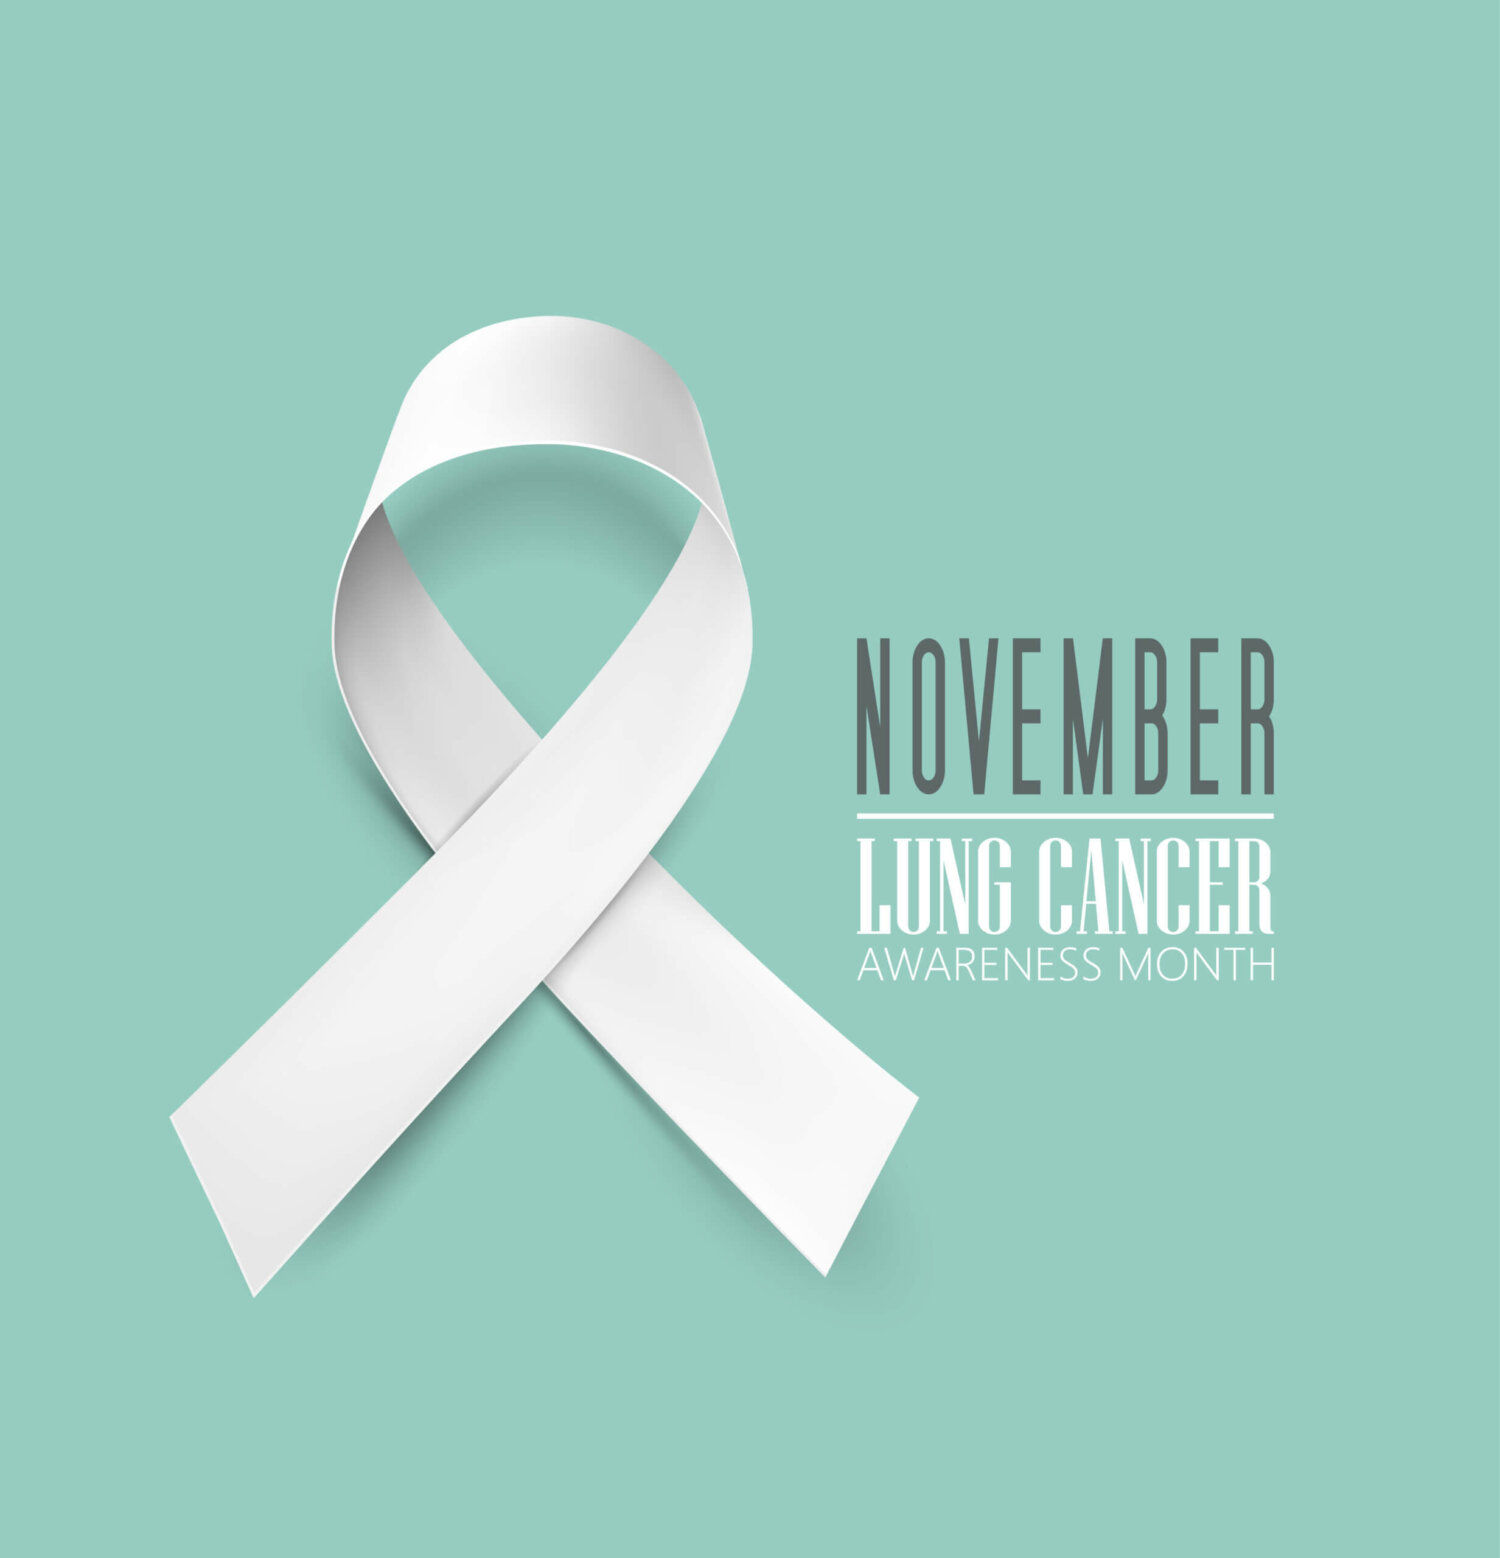 Lung Cancer Awareness Month – Raising Awareness of Lung Cancer and the Effect of Asbestos Exposure